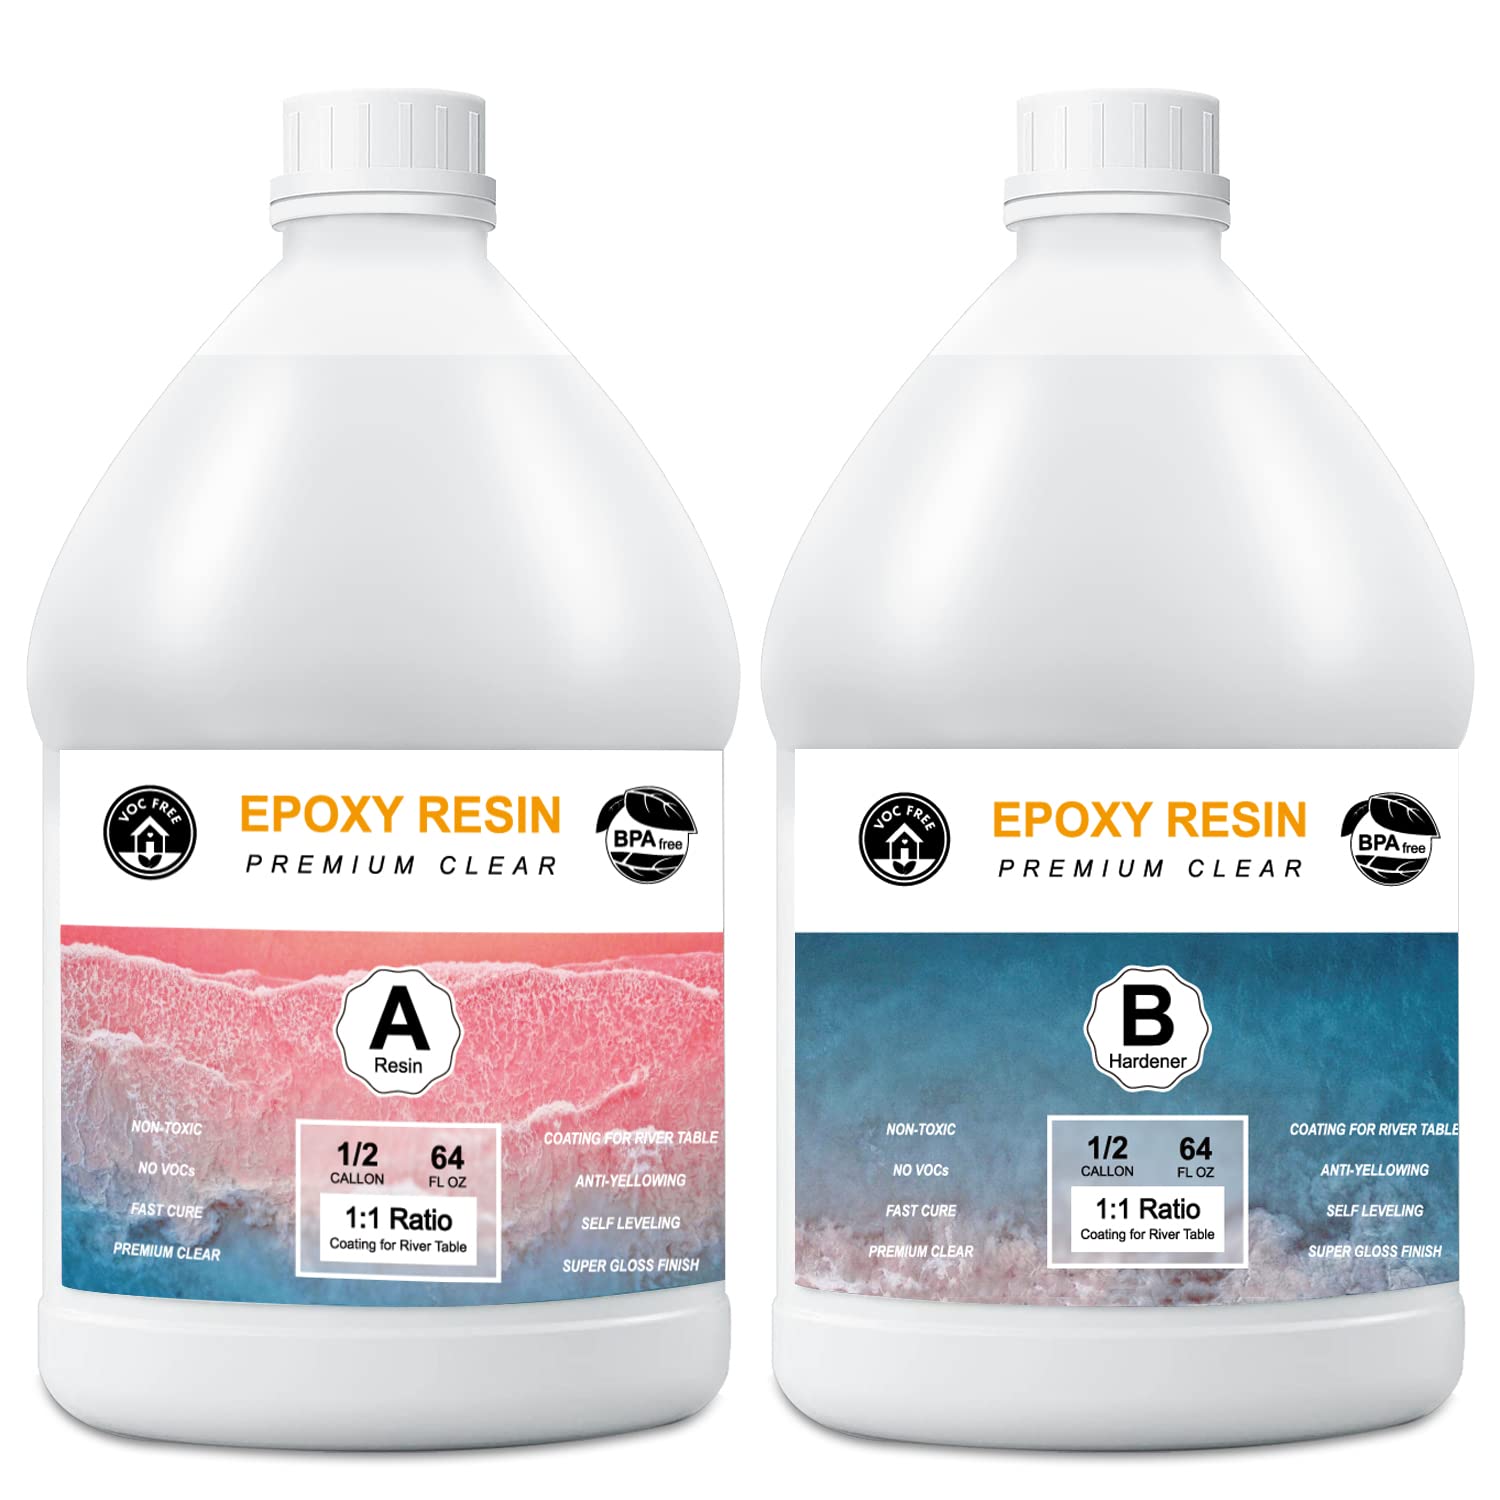 2 part epoxy resin, 1 gallon kit, clear resin, crafts, art, coating, self  leveling, easy to use (1-1 mixing)